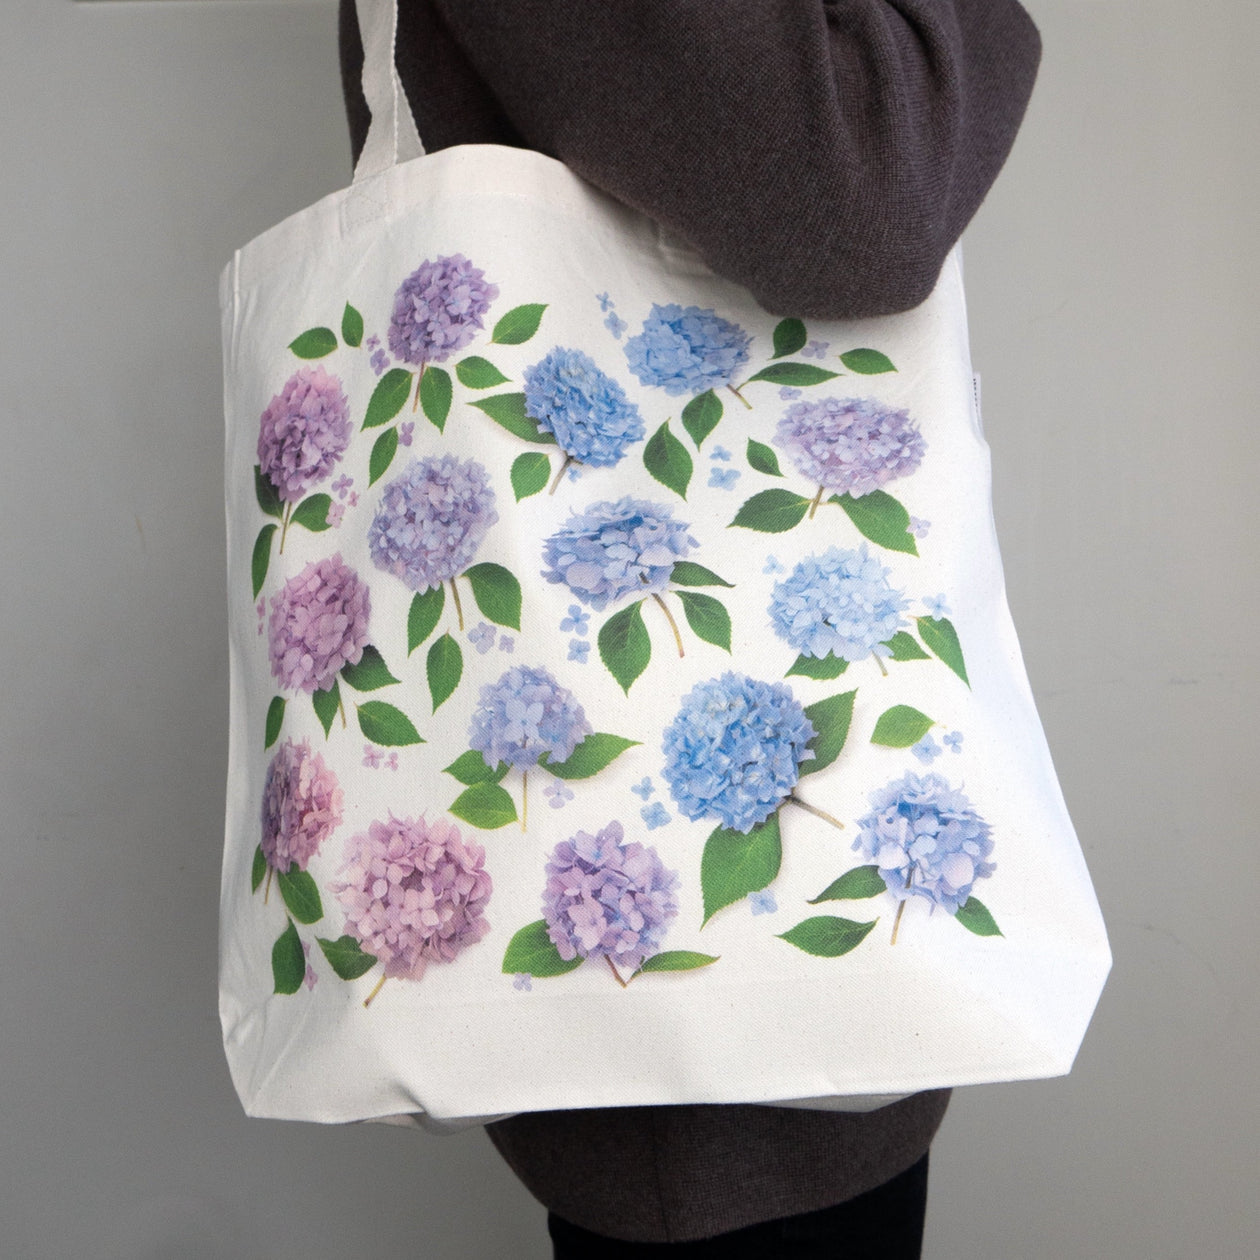 tote bag with hydrangea pattern in pinks, blues, and purples